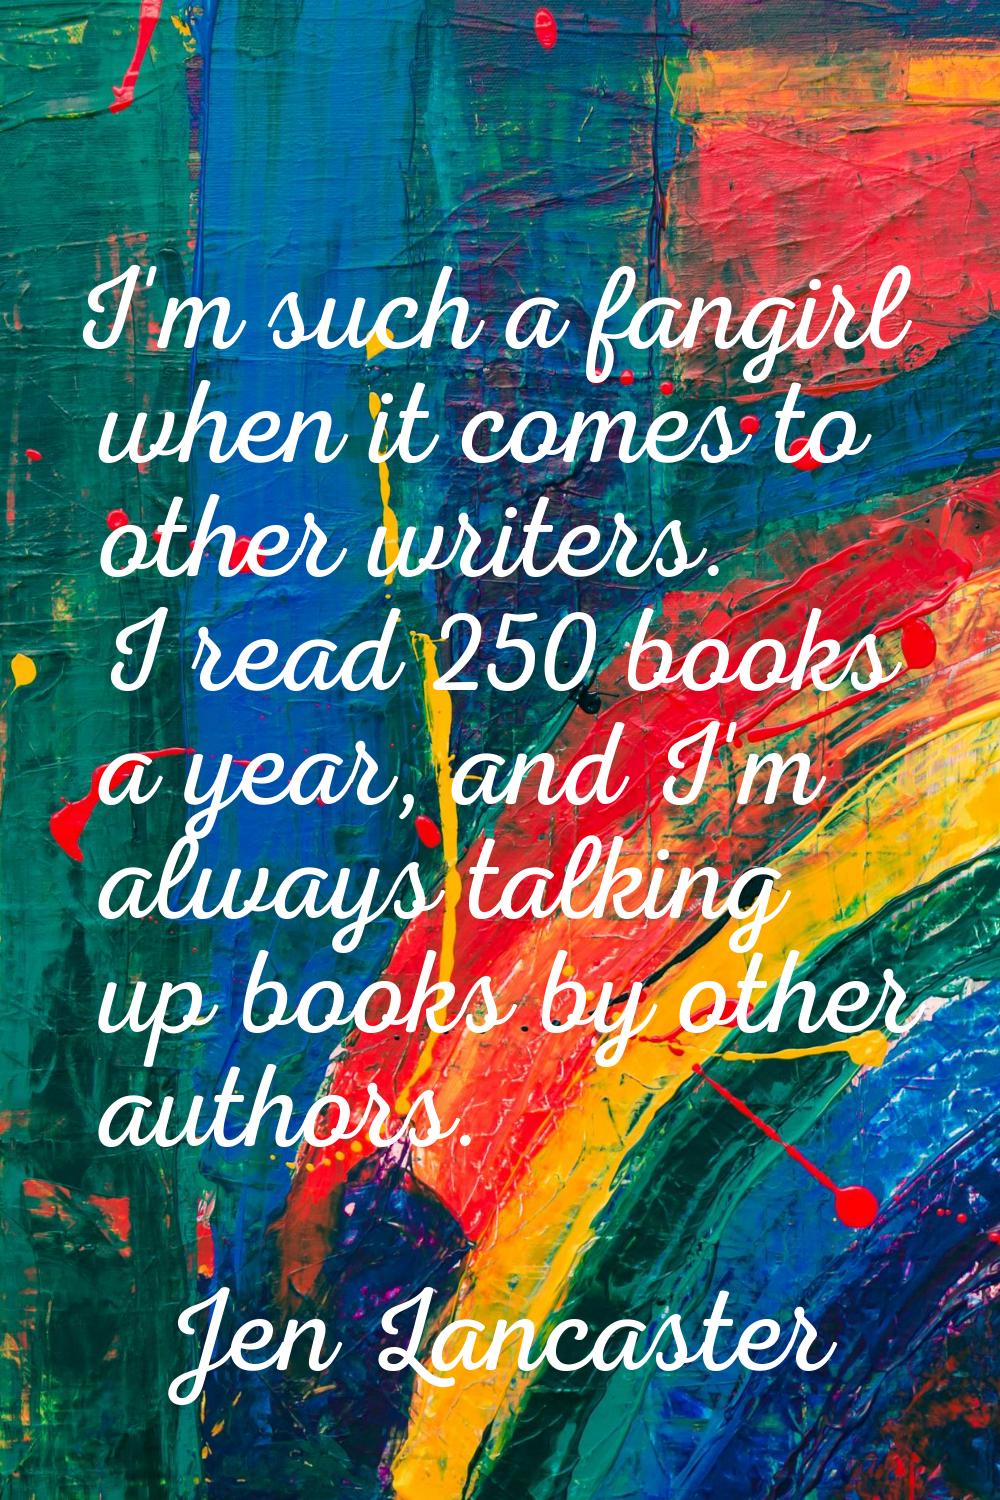 I'm such a fangirl when it comes to other writers. I read 250 books a year, and I'm always talking 